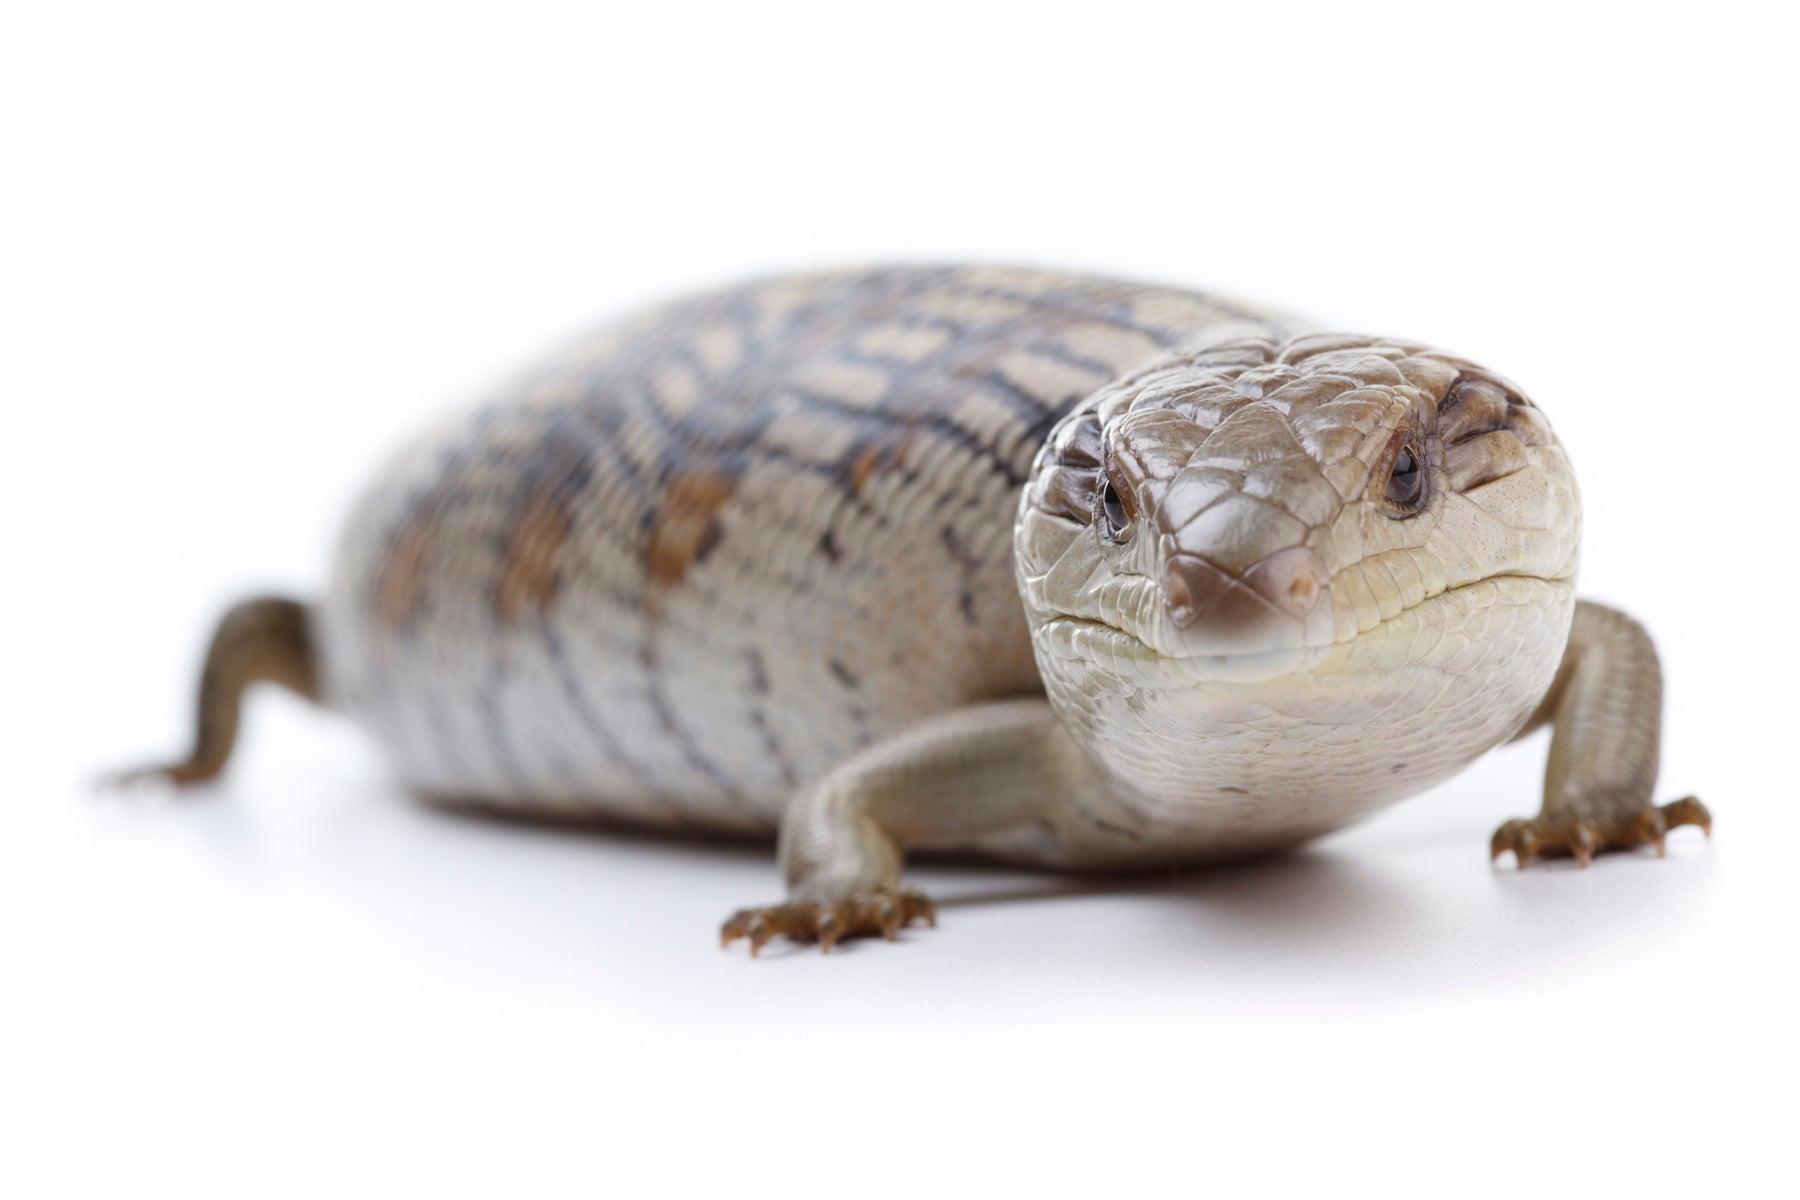 How to Care for Your Blue Tongue Skink